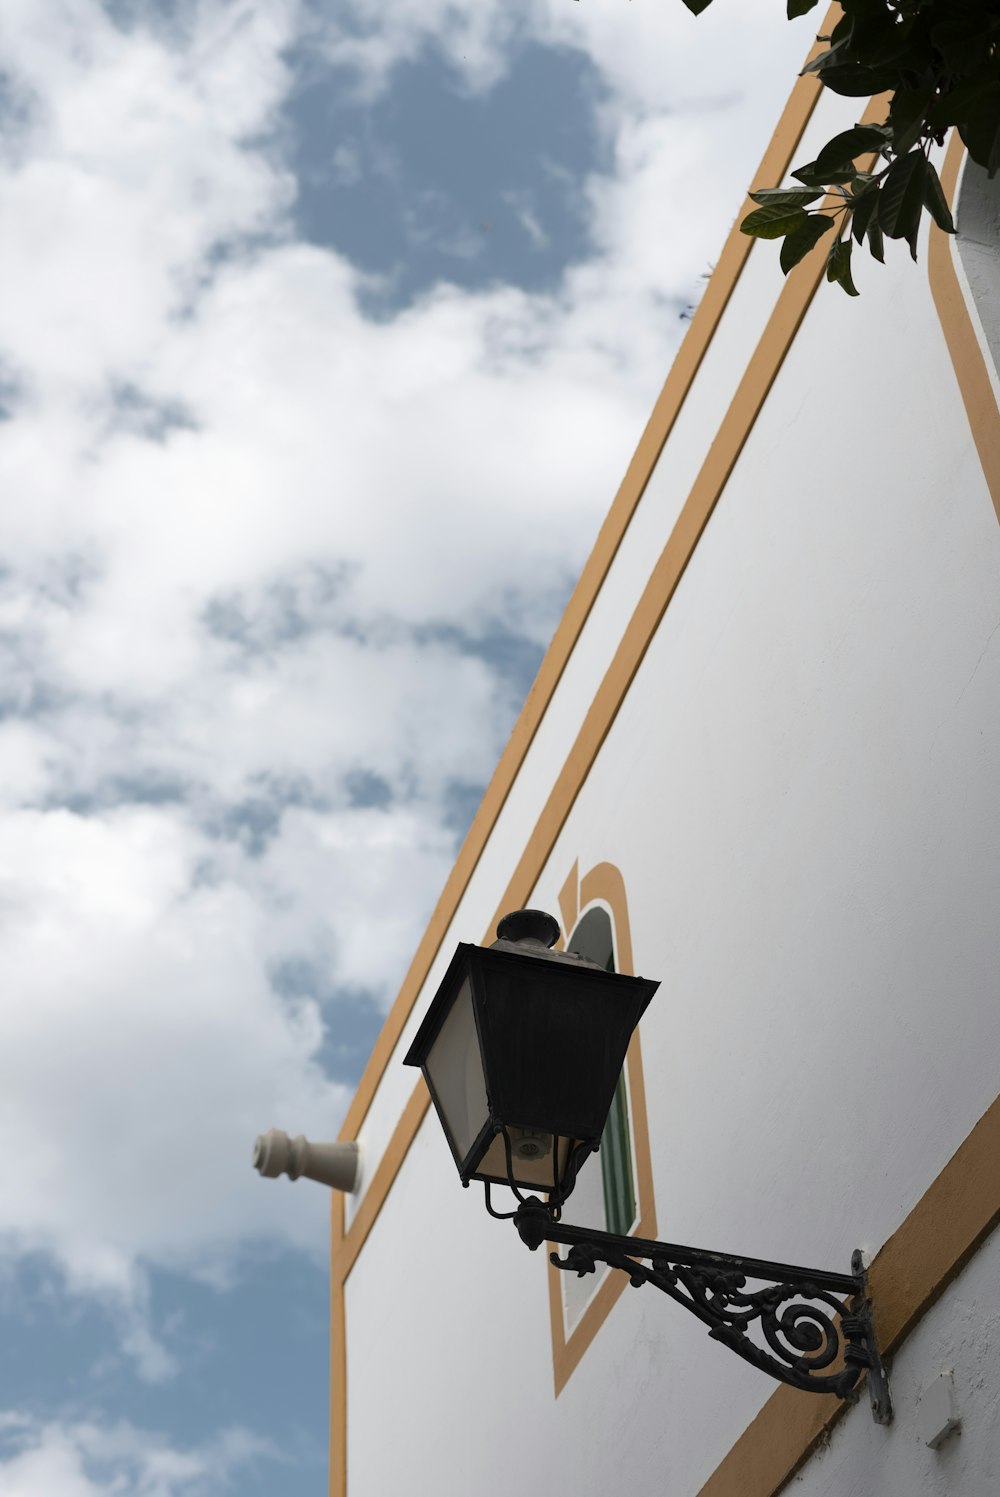 a street light attached to the side of a building